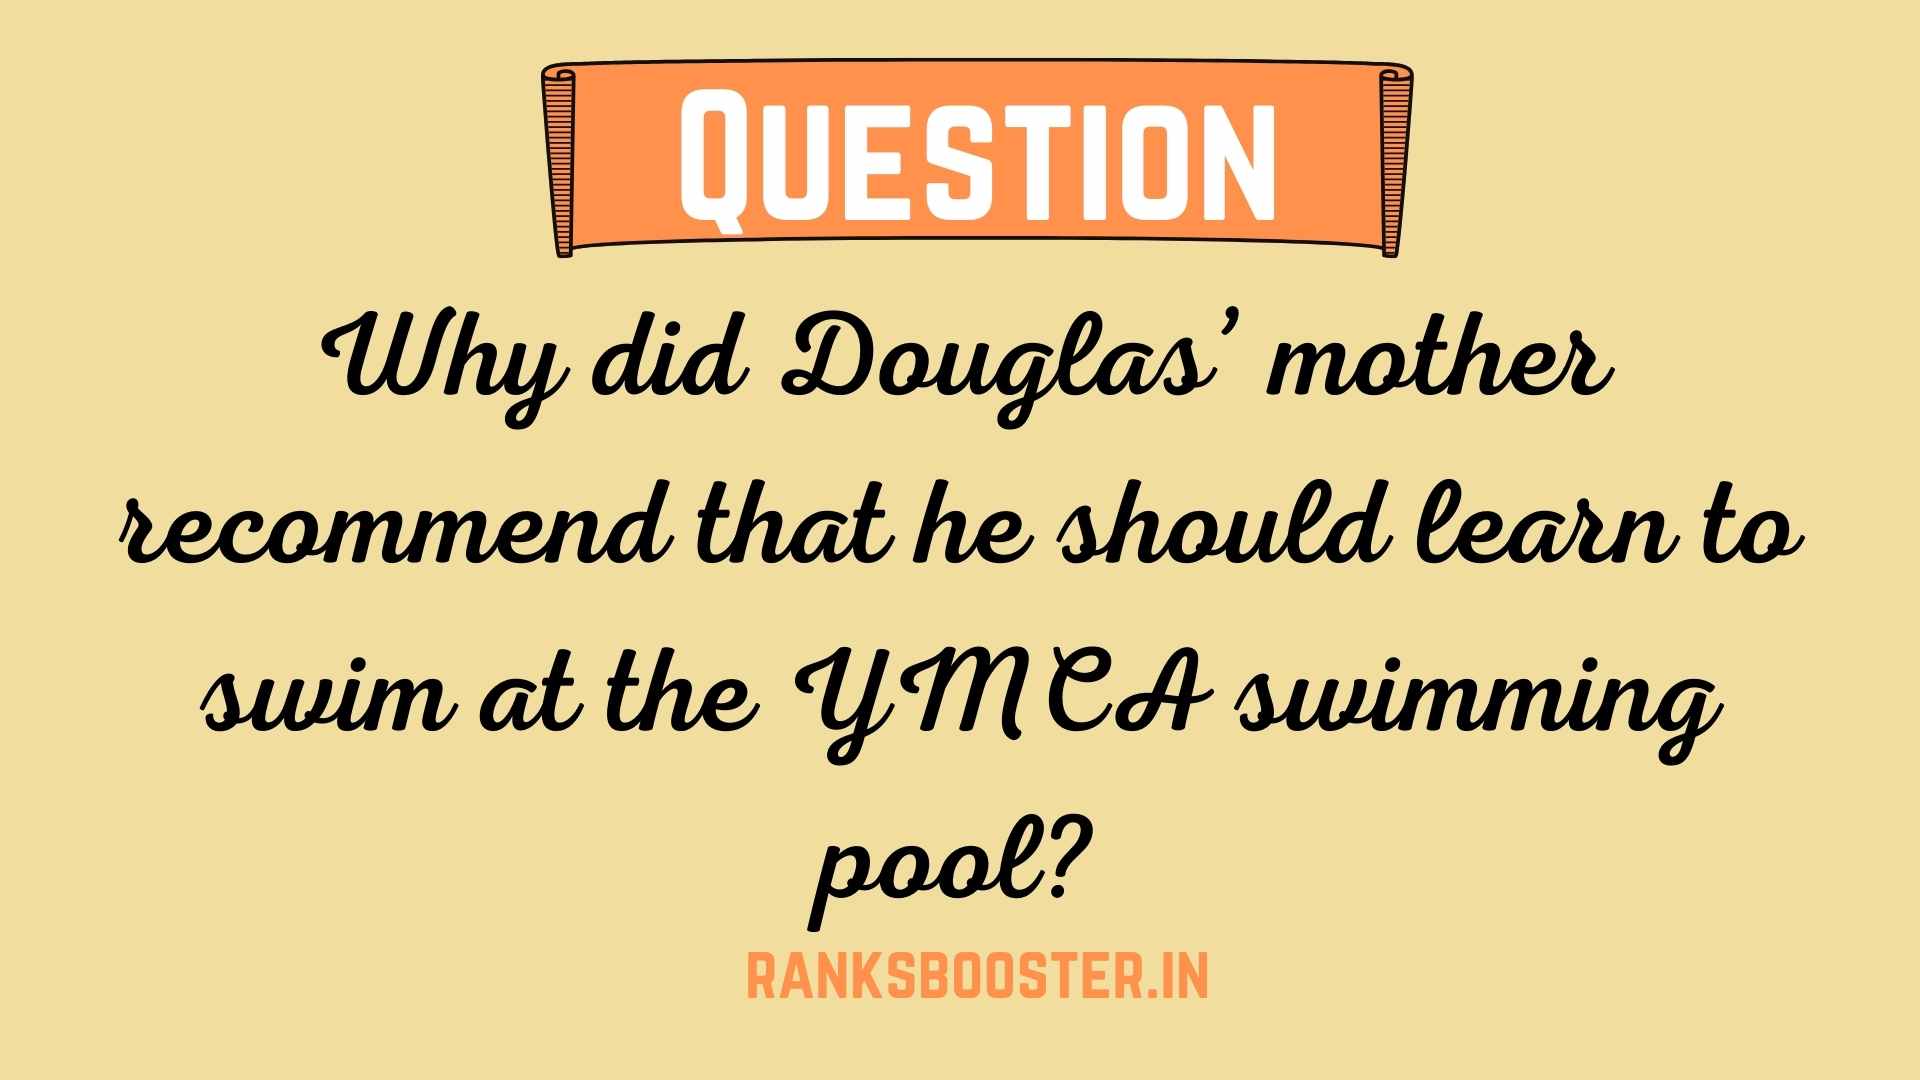 Why did Douglas’ mother recommend that he should learn to swim at the YMCA swimming pool?